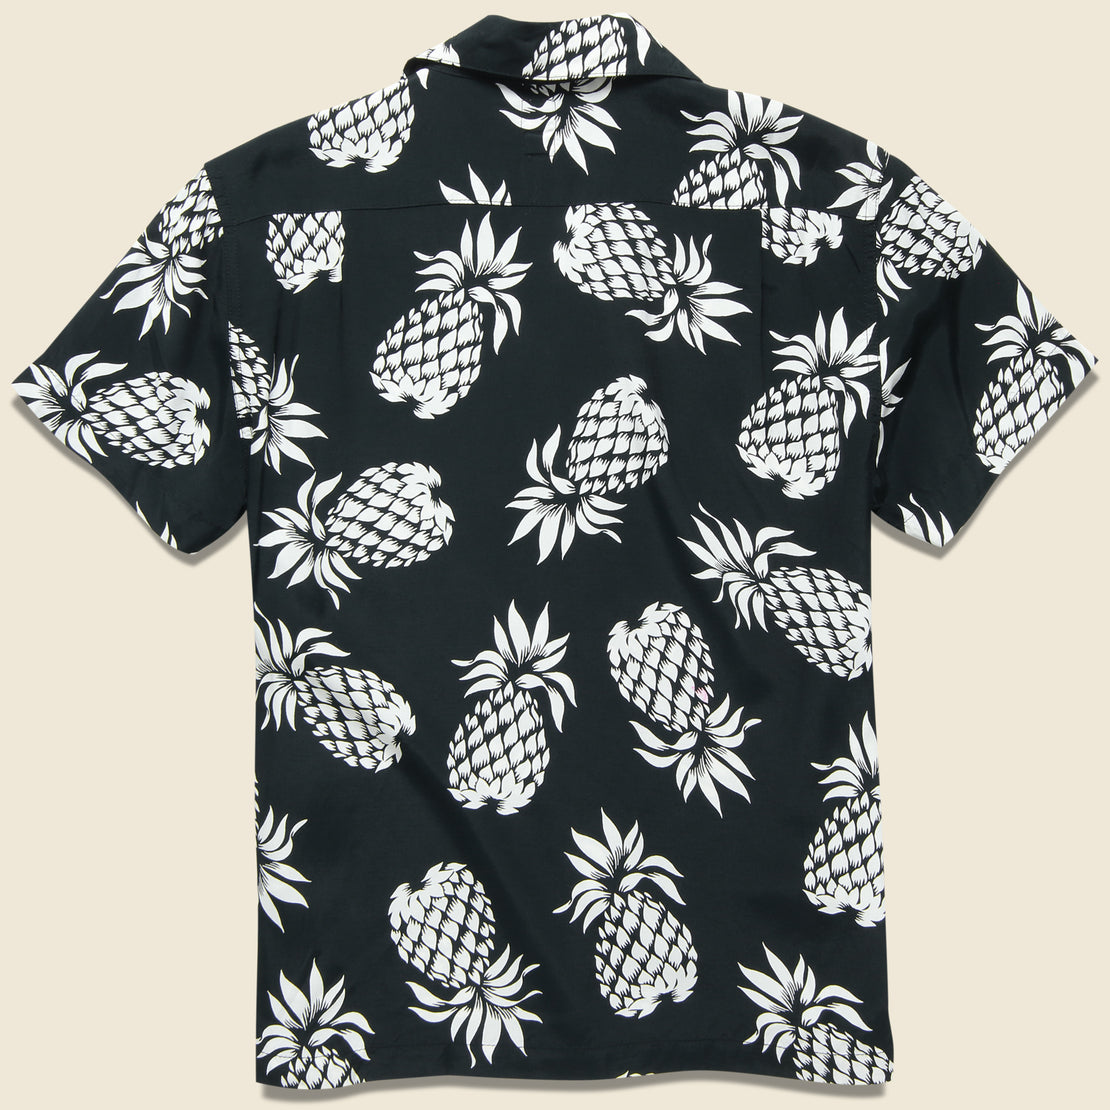 Wrench Aloha Shirt - Black - KATO - STAG Provisions - Tops - S/S Woven - Floral